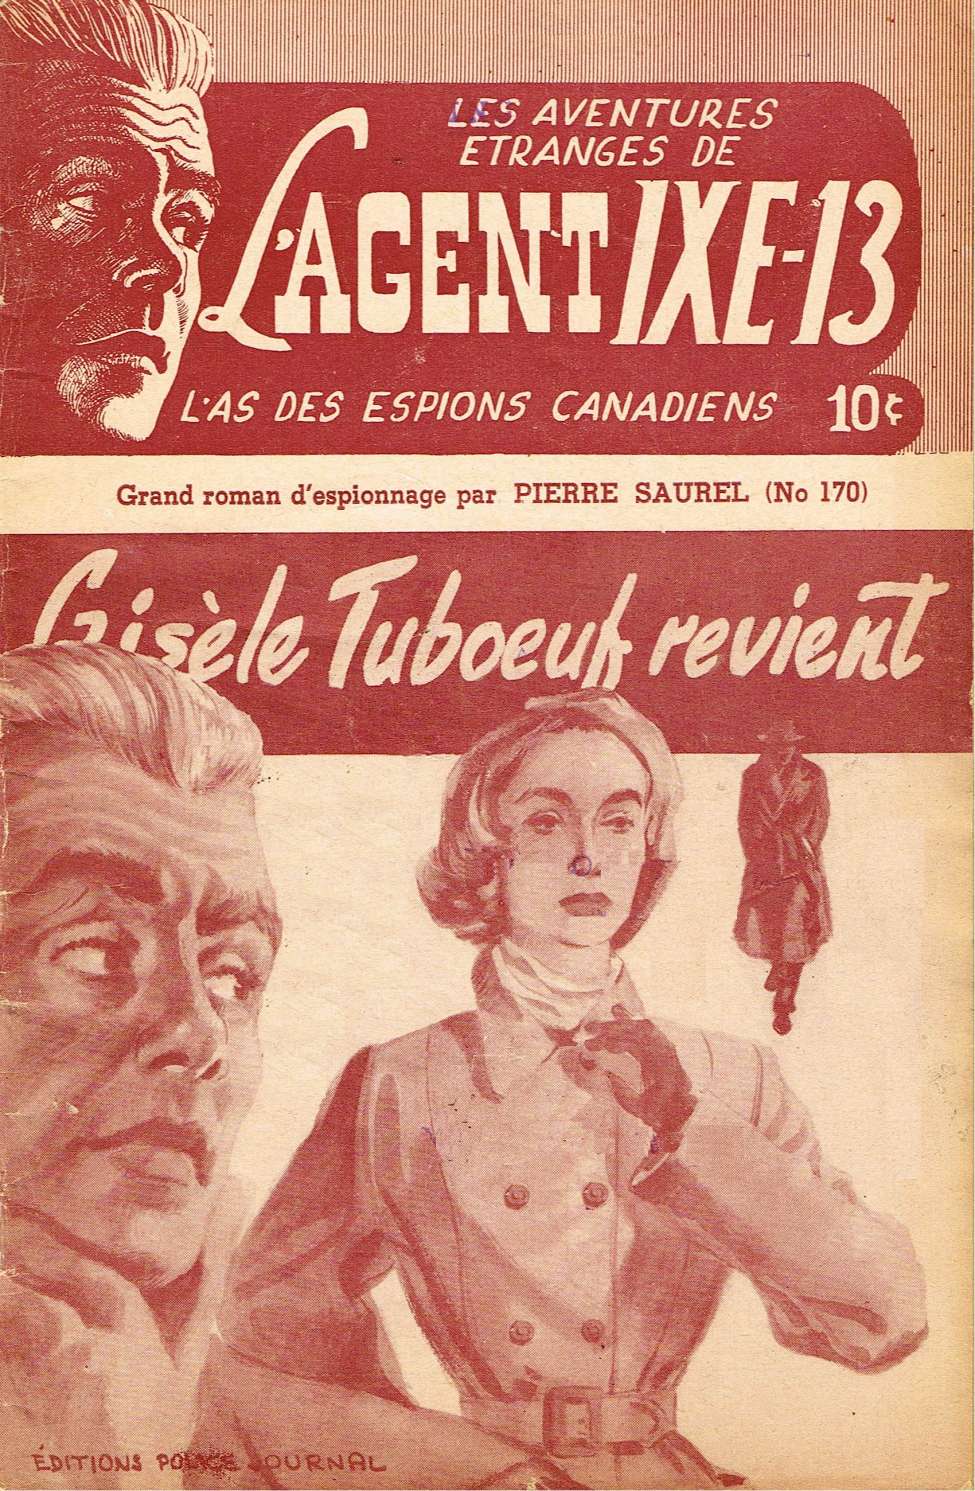 Comic Book Cover For L'Agent IXE-13 v2 170 - Gisèle Tuboeuf revient